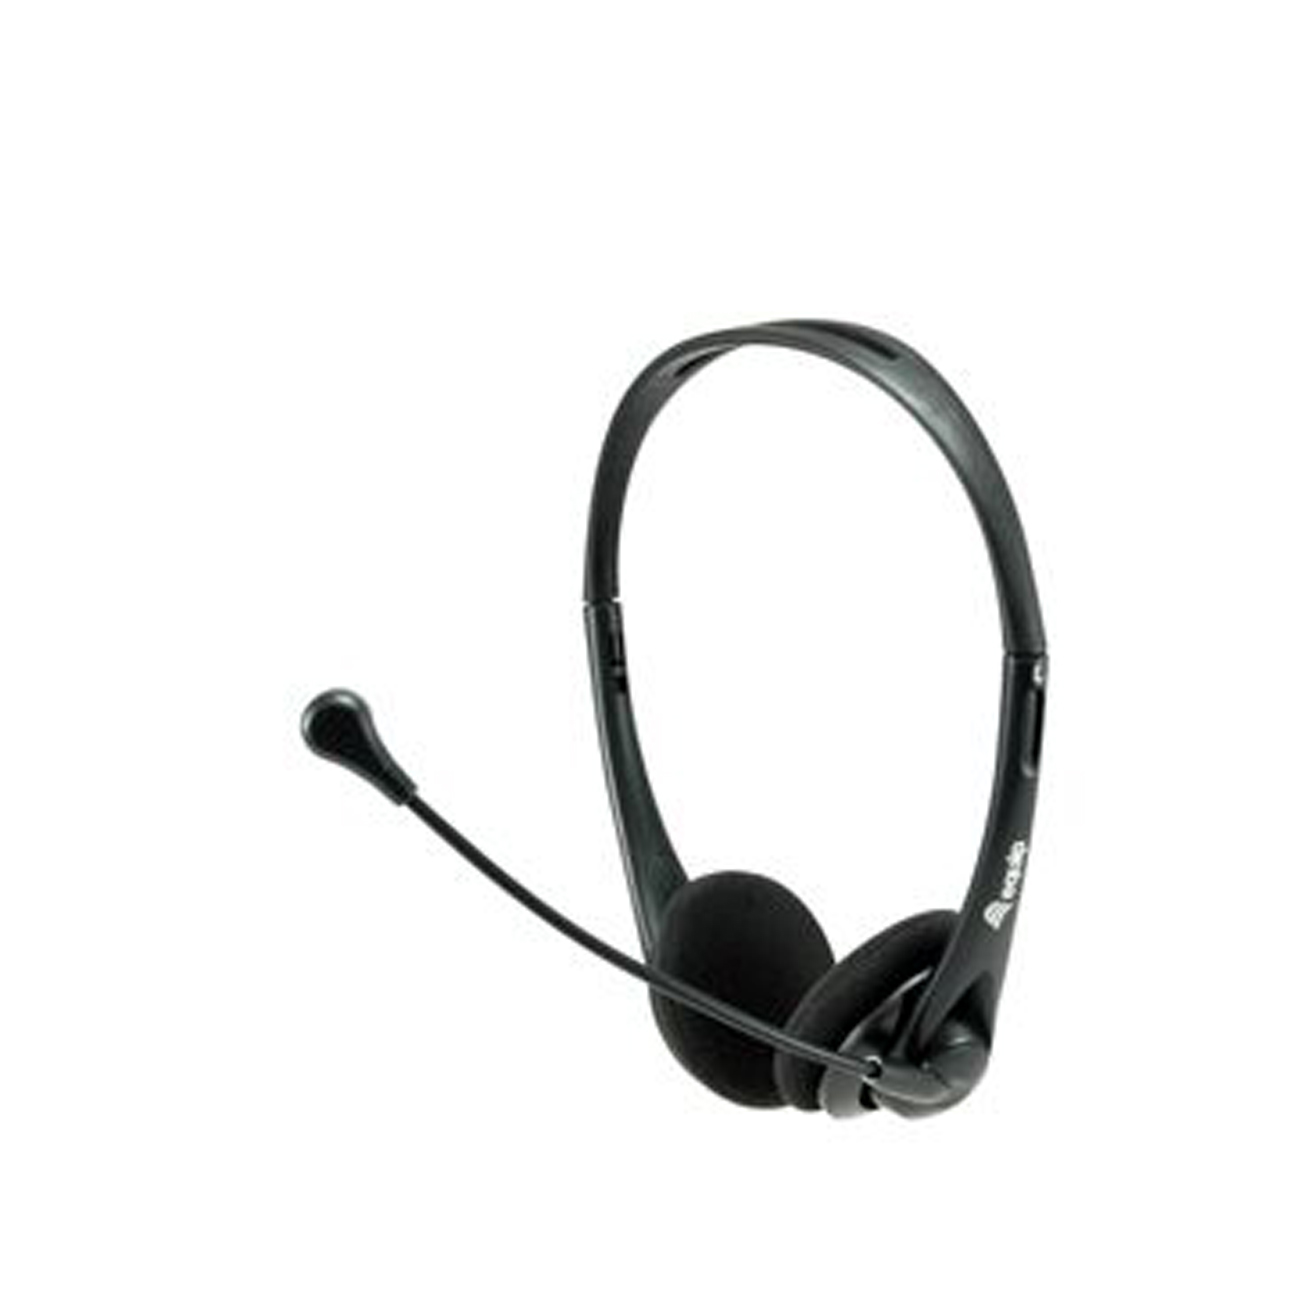 Equip Headset USB 245305 1.8m Kabel,Mikro,int.BedStereosw